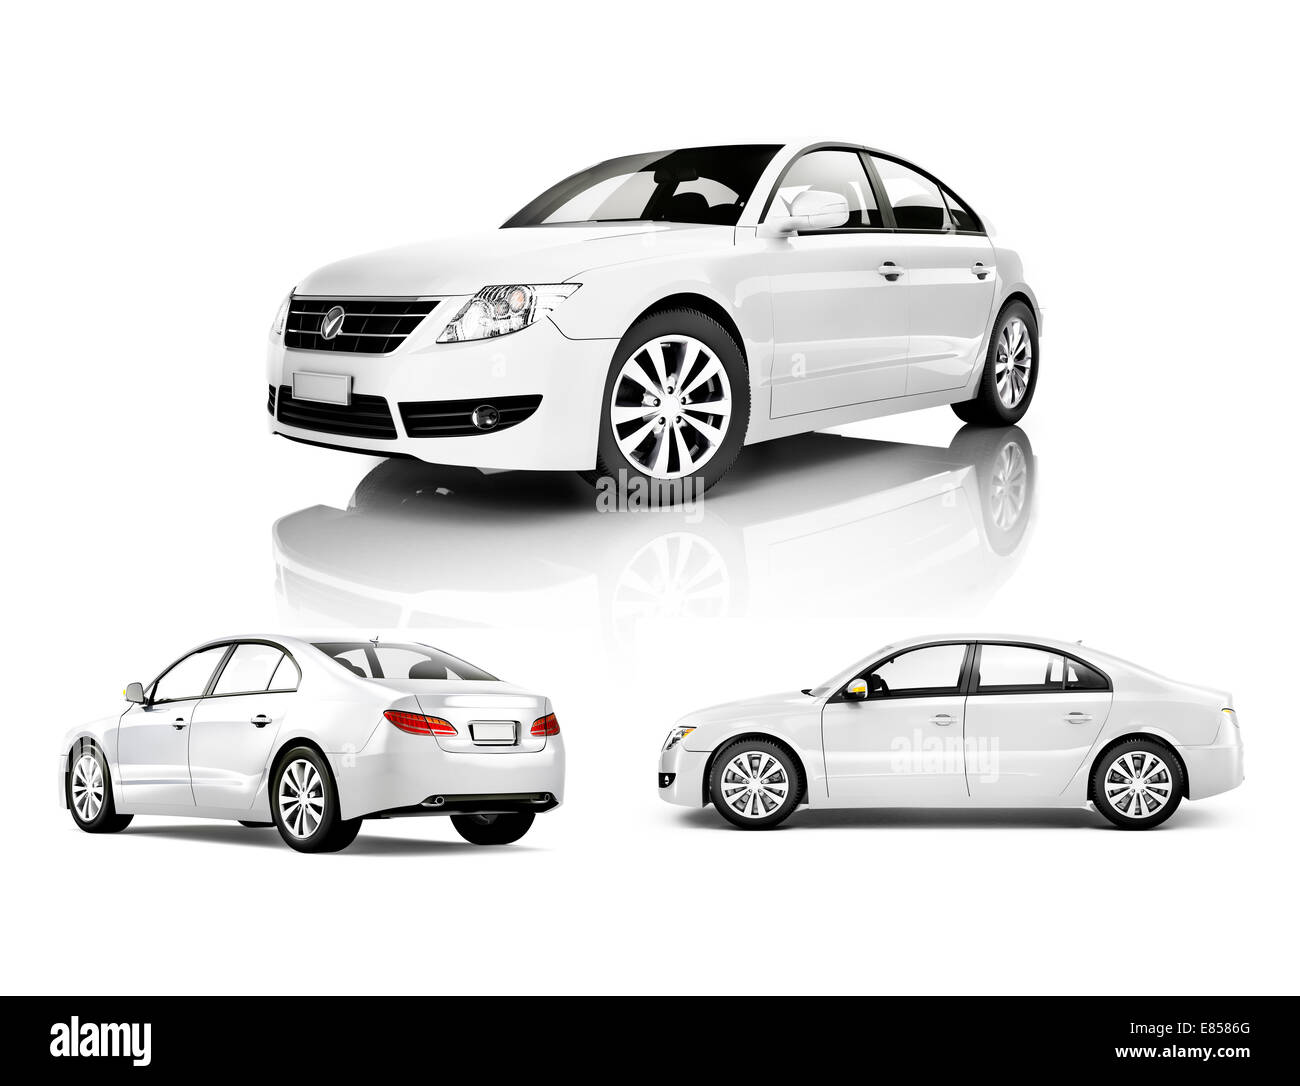 Three Dimensional Image of a White Car Stock Photo